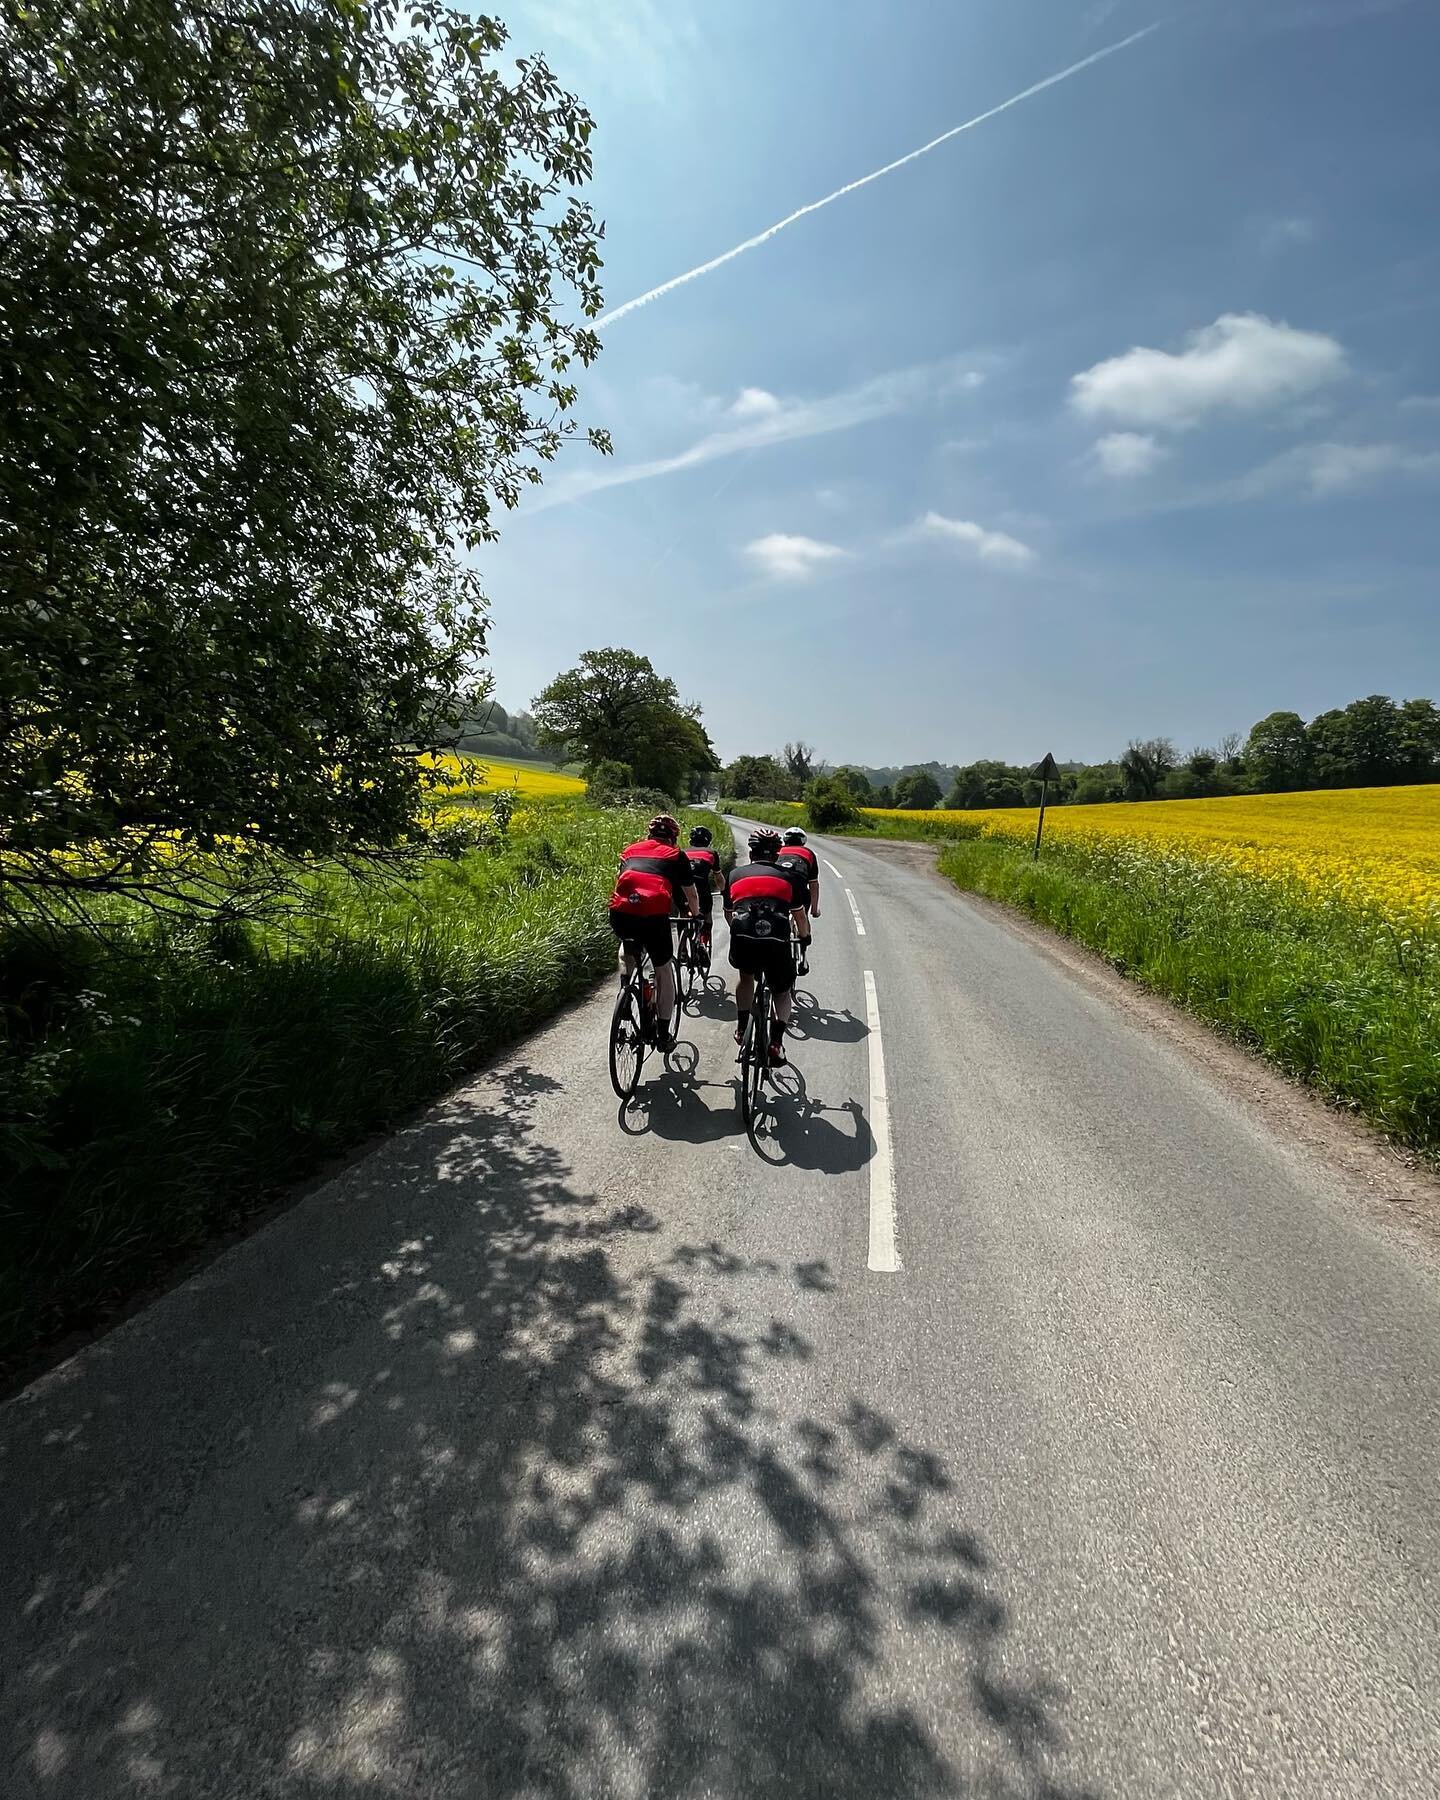 200kms out to Stadhampton, Oxfordshire #chaingang #ridewithmates #cyclingclub